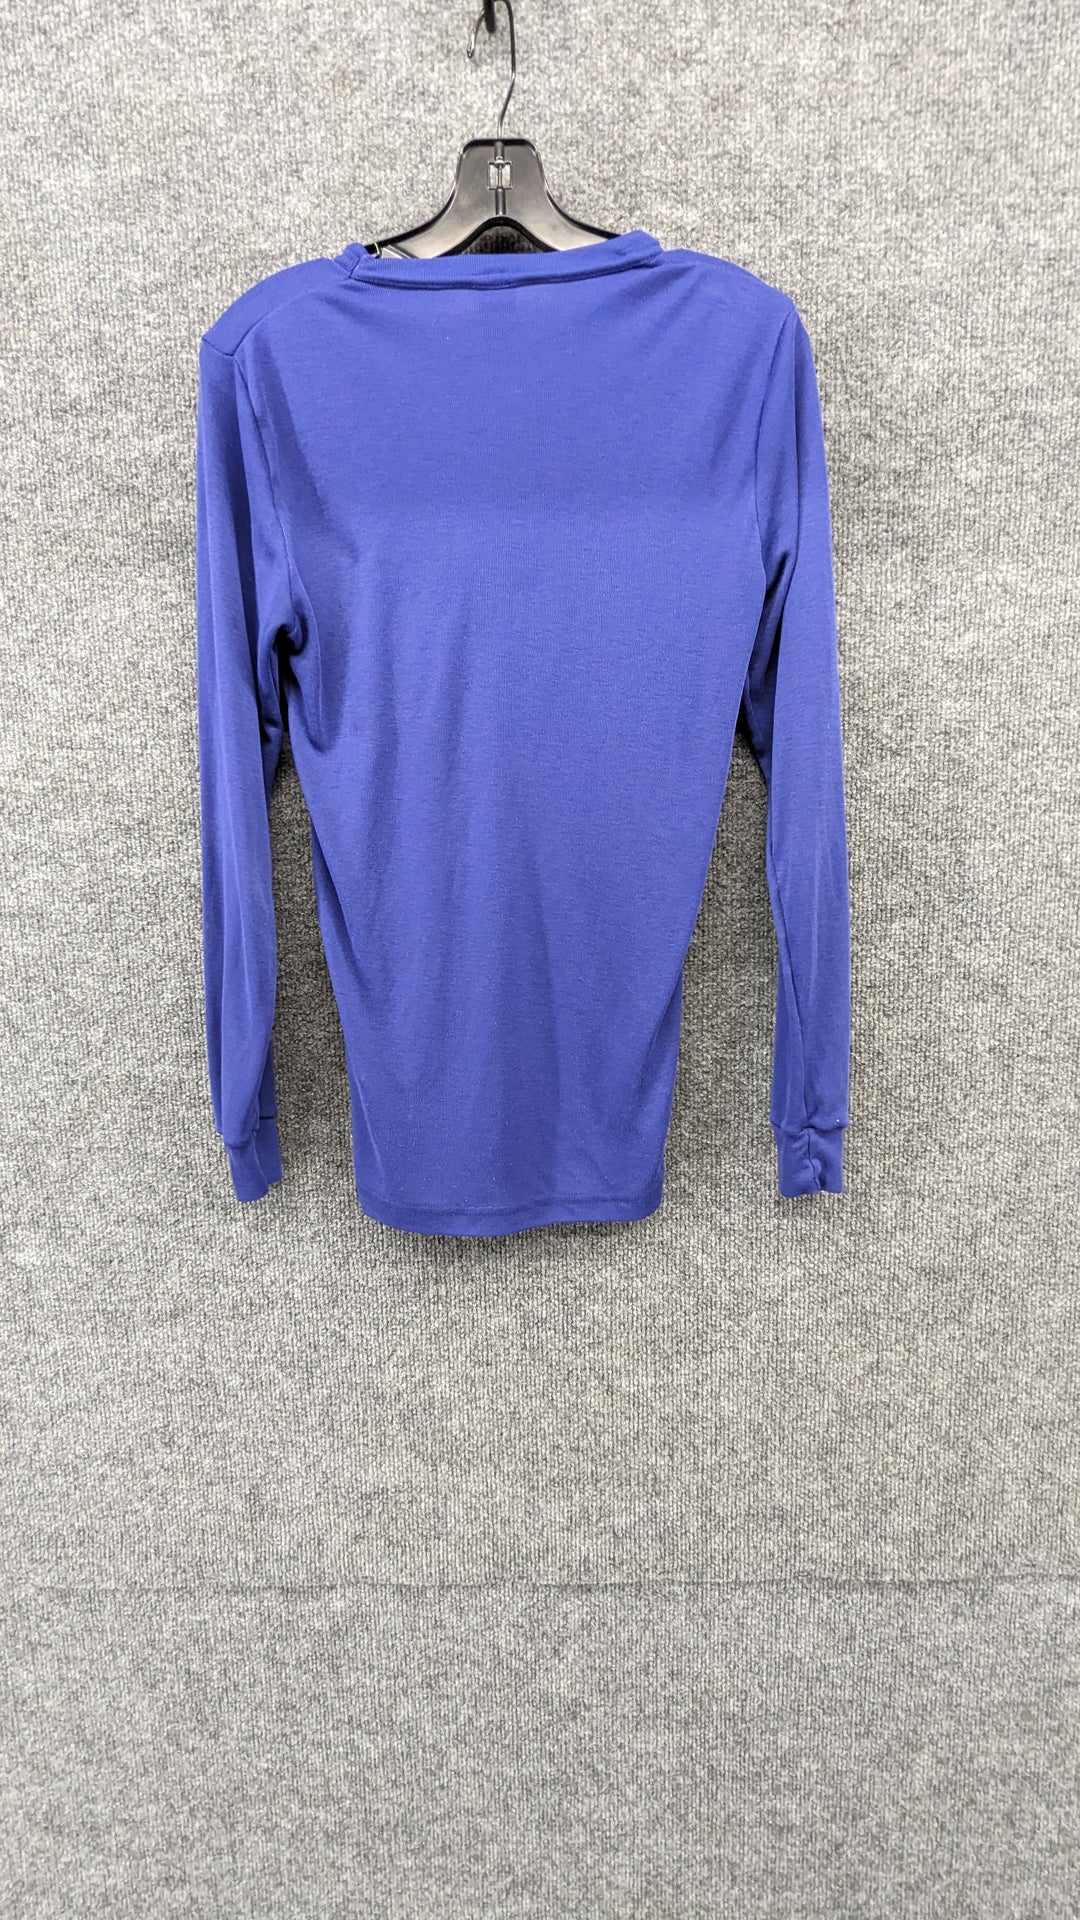 Patagonia Size Small Men's Base Layer Top